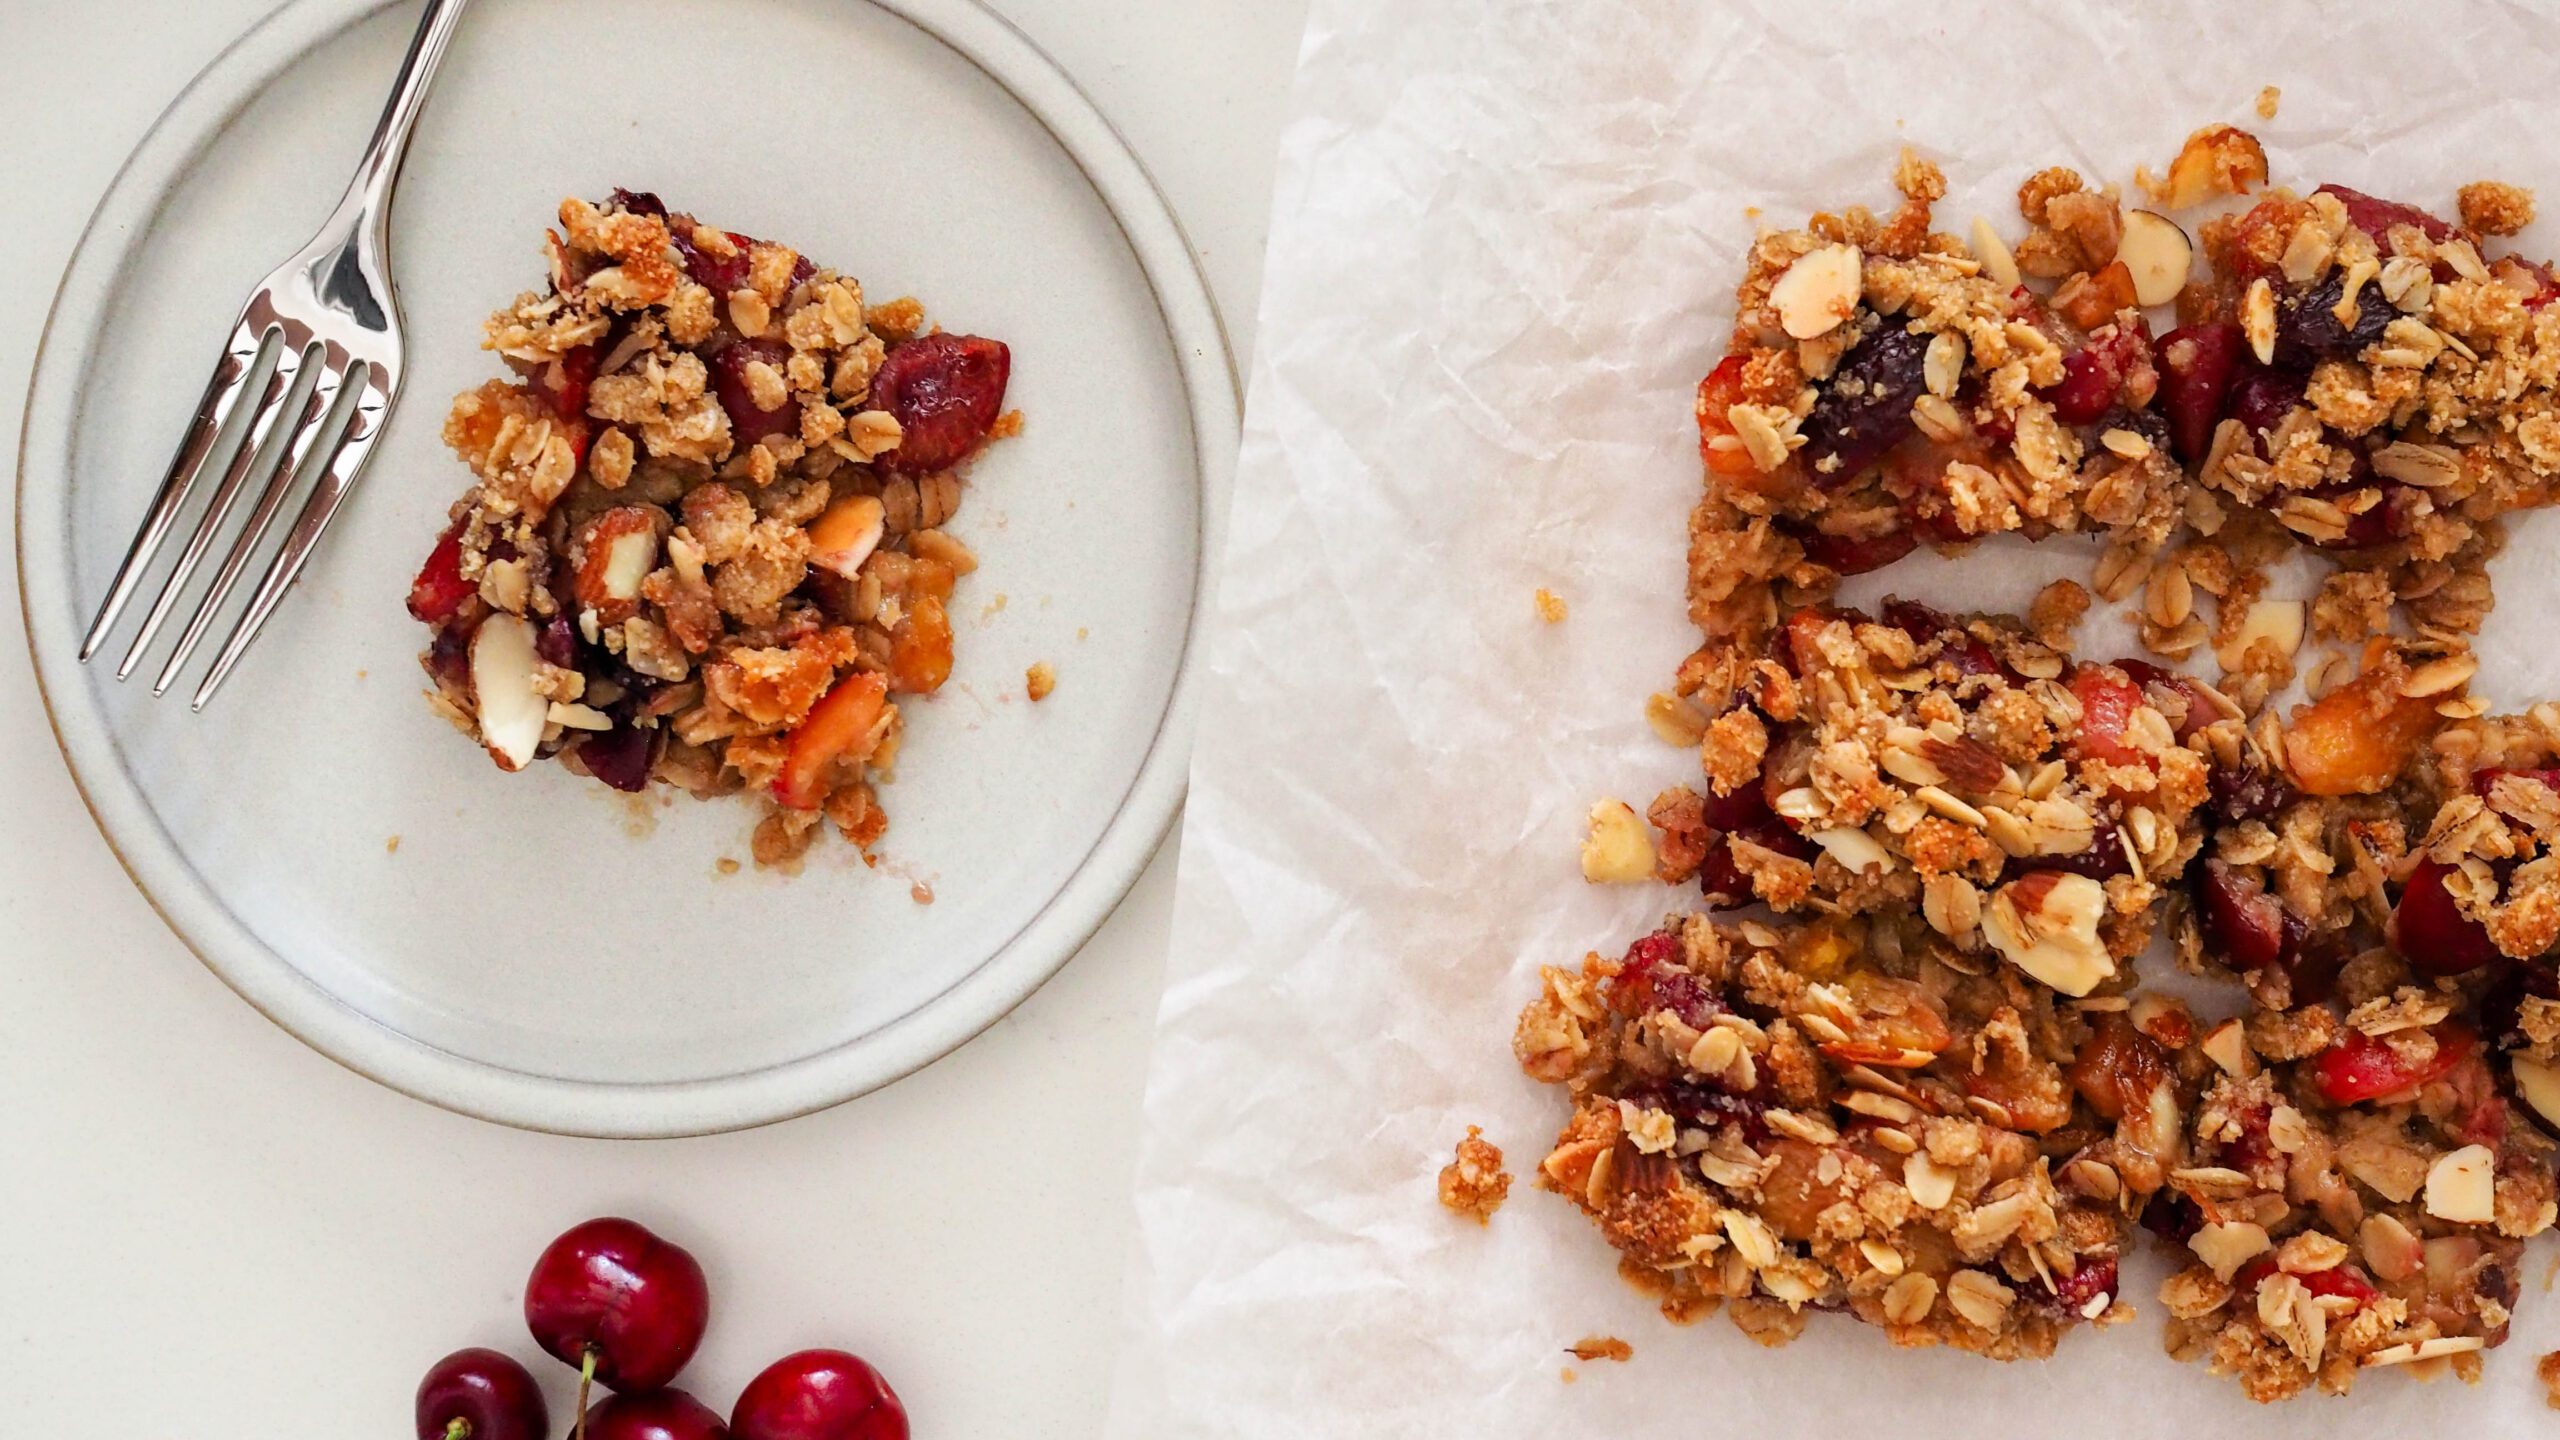 Overhead view of a gluten-free cherry almond crumble bar on a plate with the rest of the pan nearby.